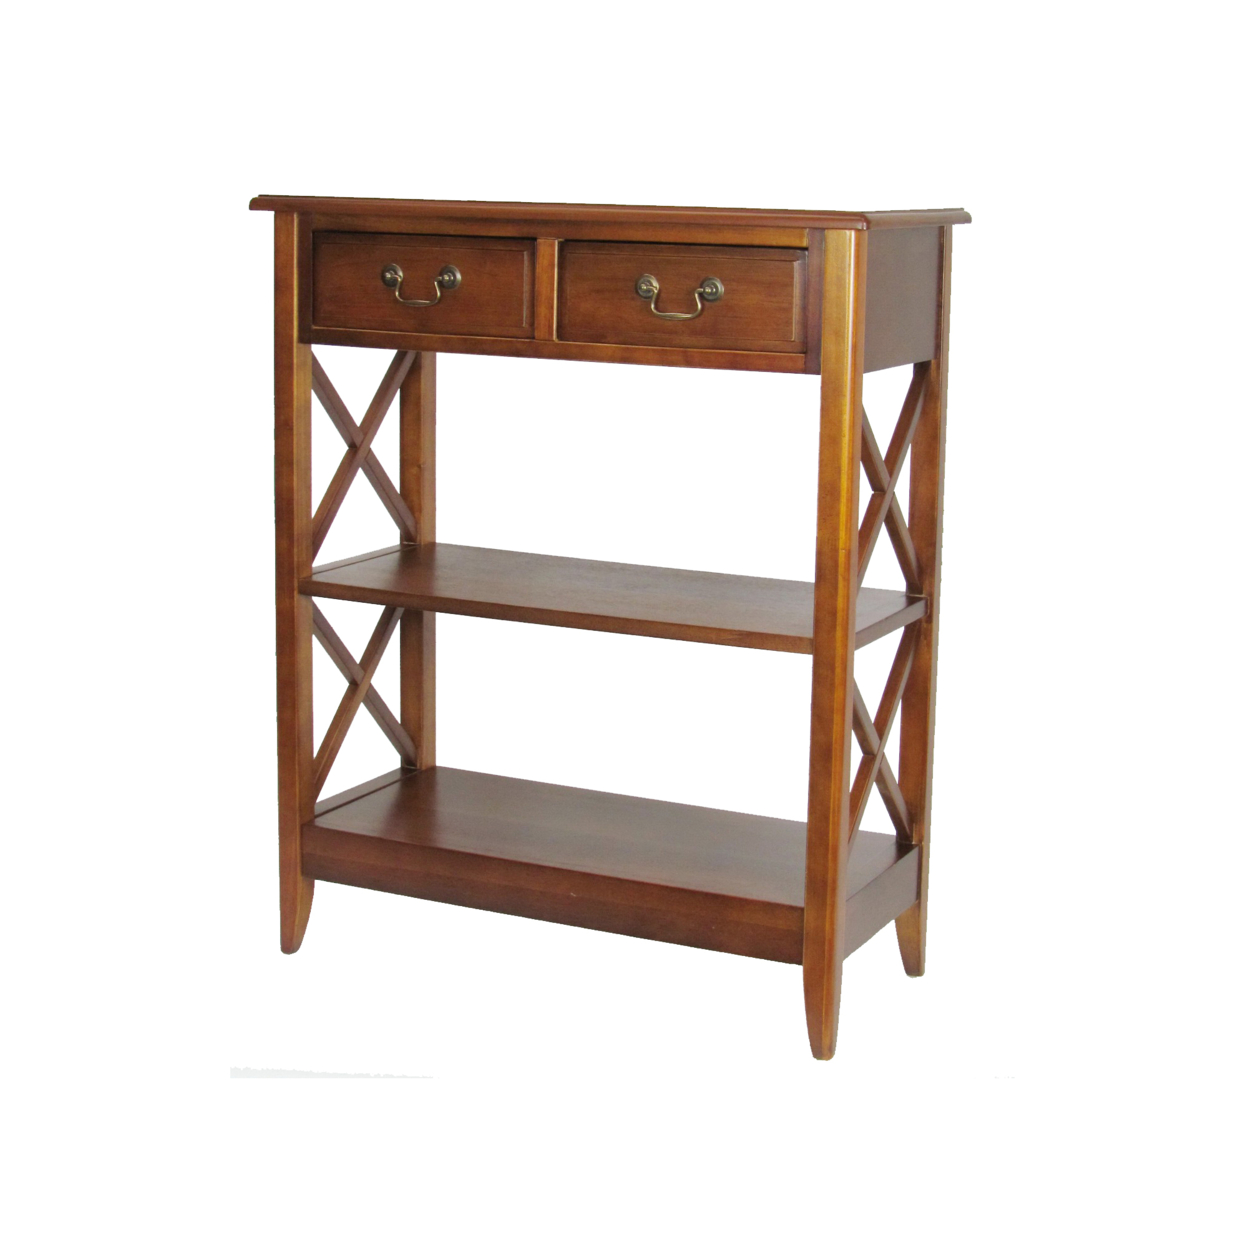 2 Drawer Wooden Accent Table With X Shape Sides, Brown- Saltoro Sherpi